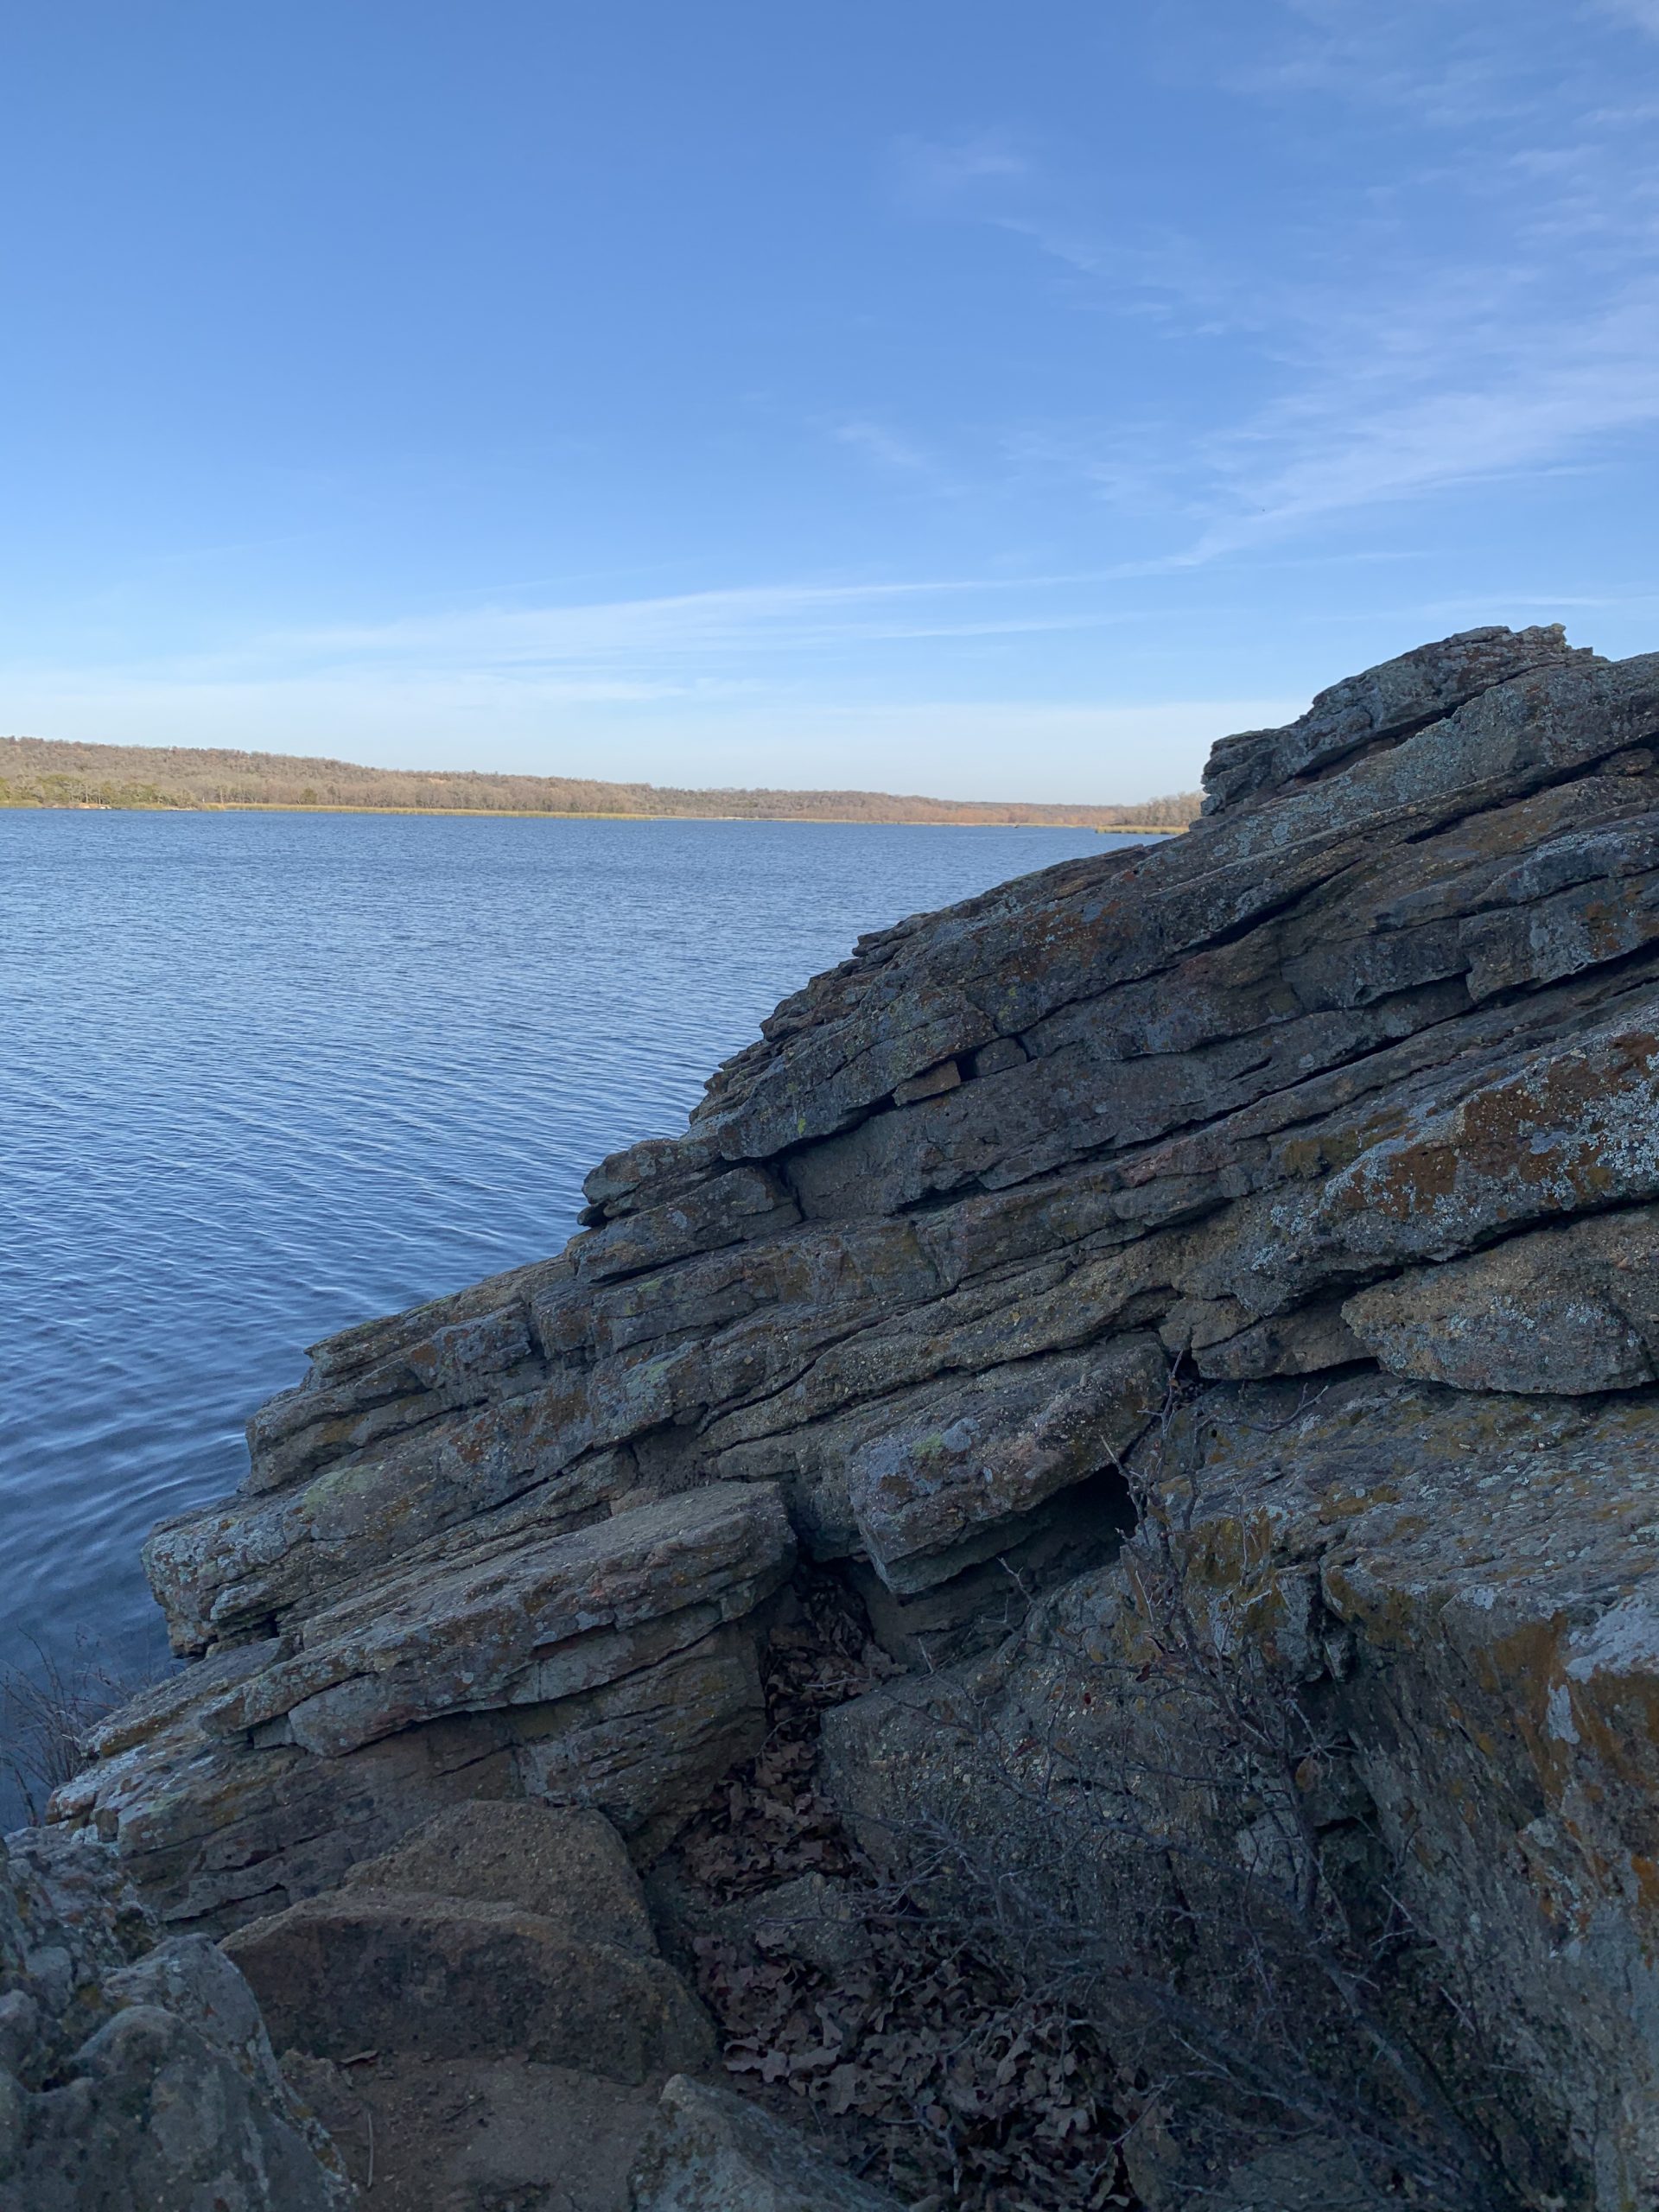 Lake Mineral wells state park